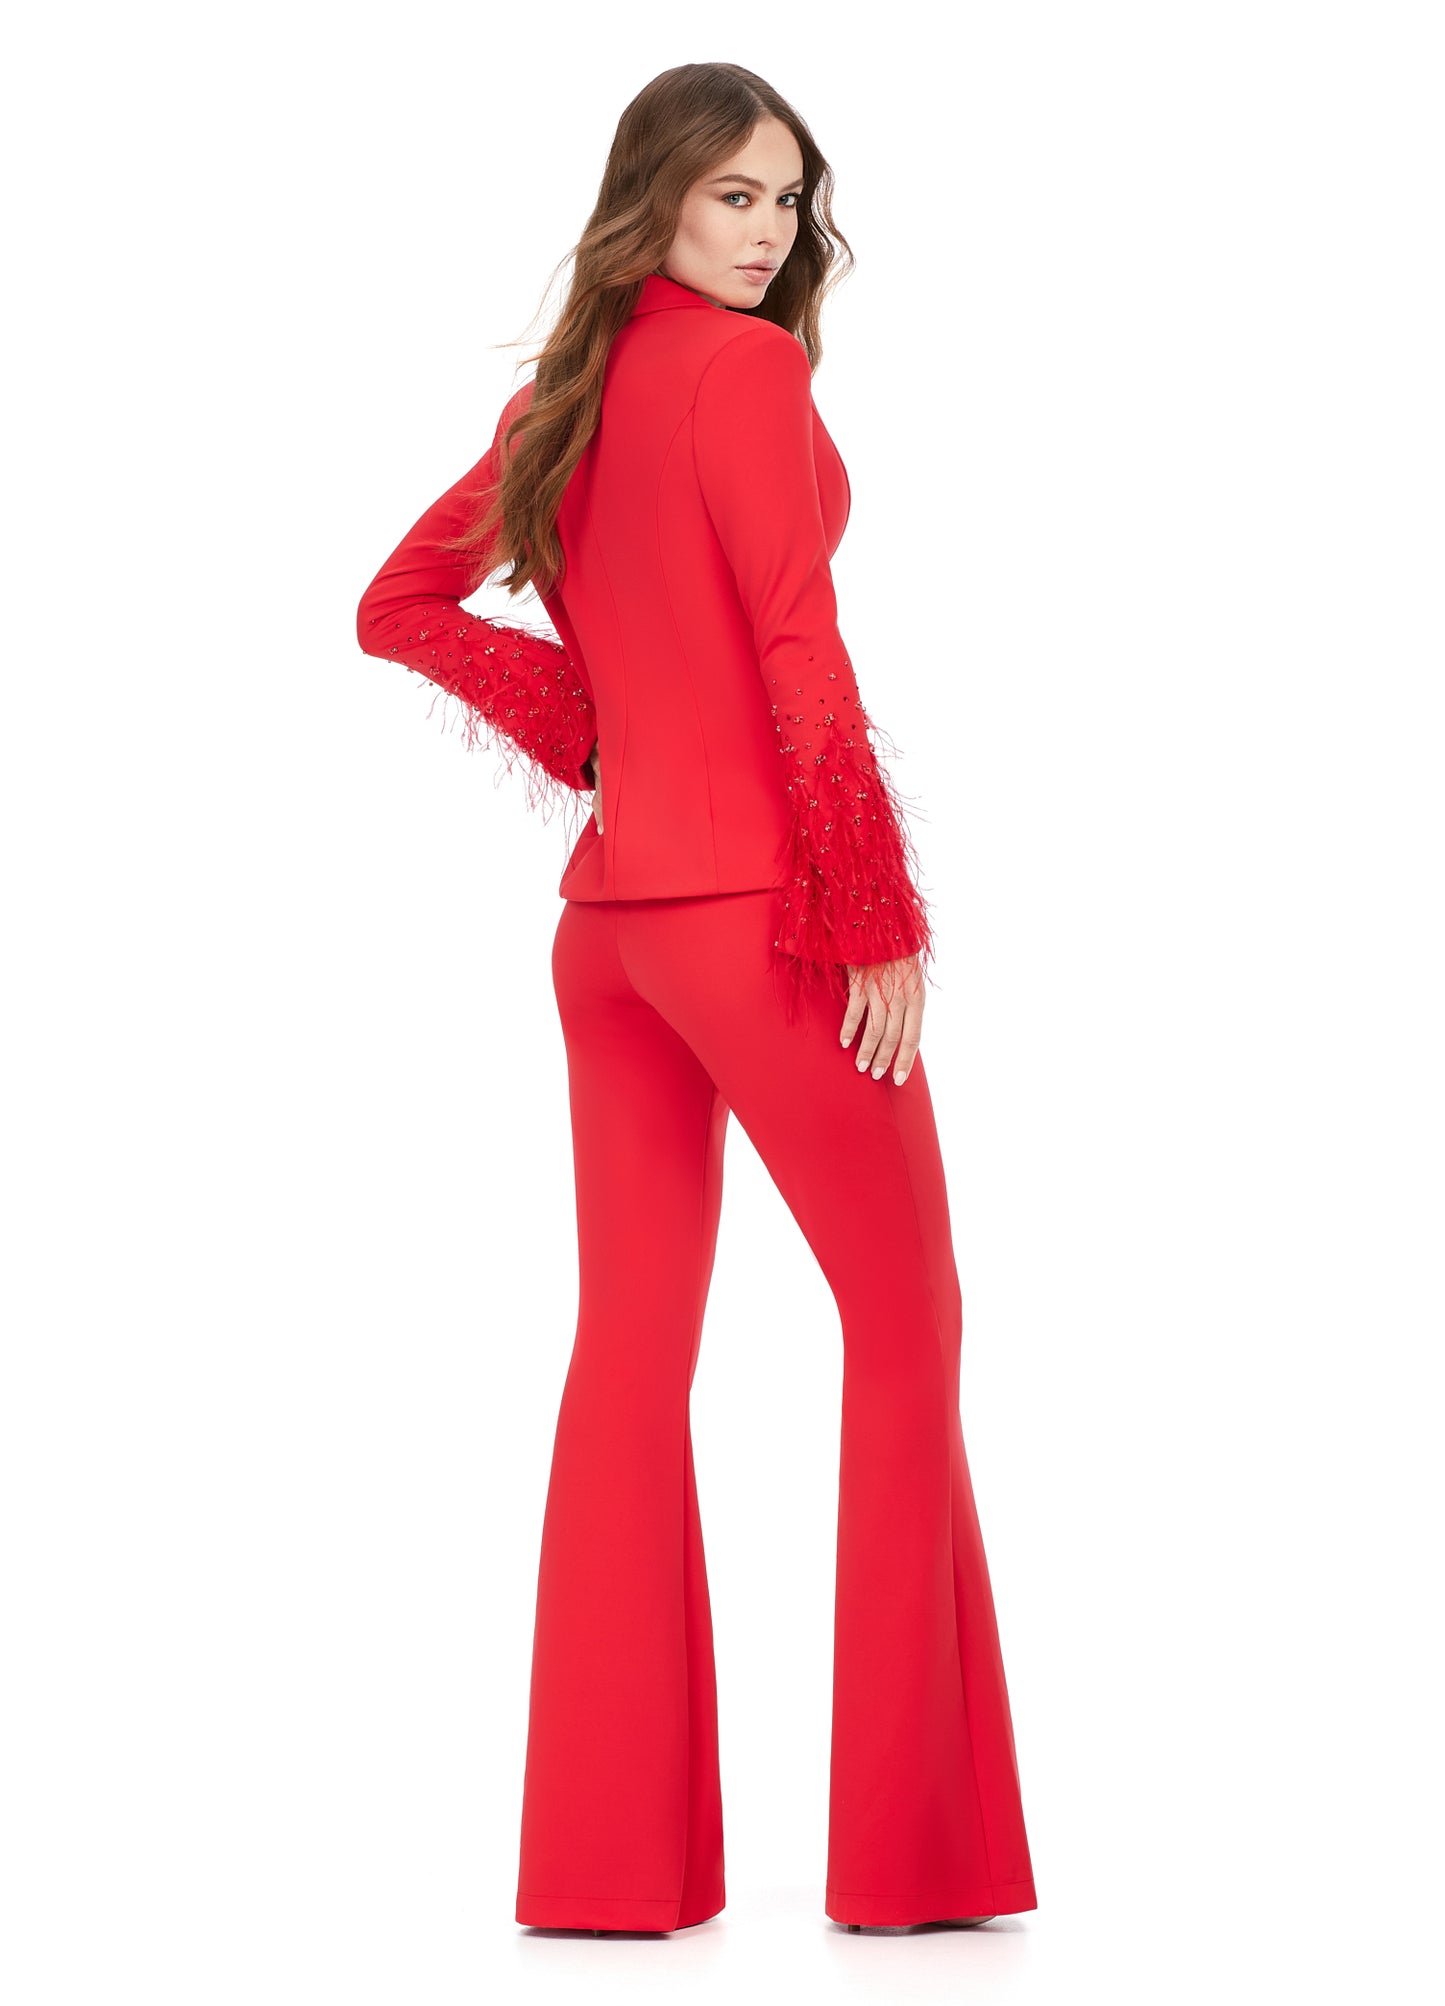 Ashley Lauren 11315 Long Sleeve With Feather And Crystal Accent Two Piece V-Neck Scuba Material Suit. We are obsessed with this suit! Made out of our signature scuba material, this two piece suit features stunning sleeve details with a mix of crystals and feathers. The pants have a flare bottom.